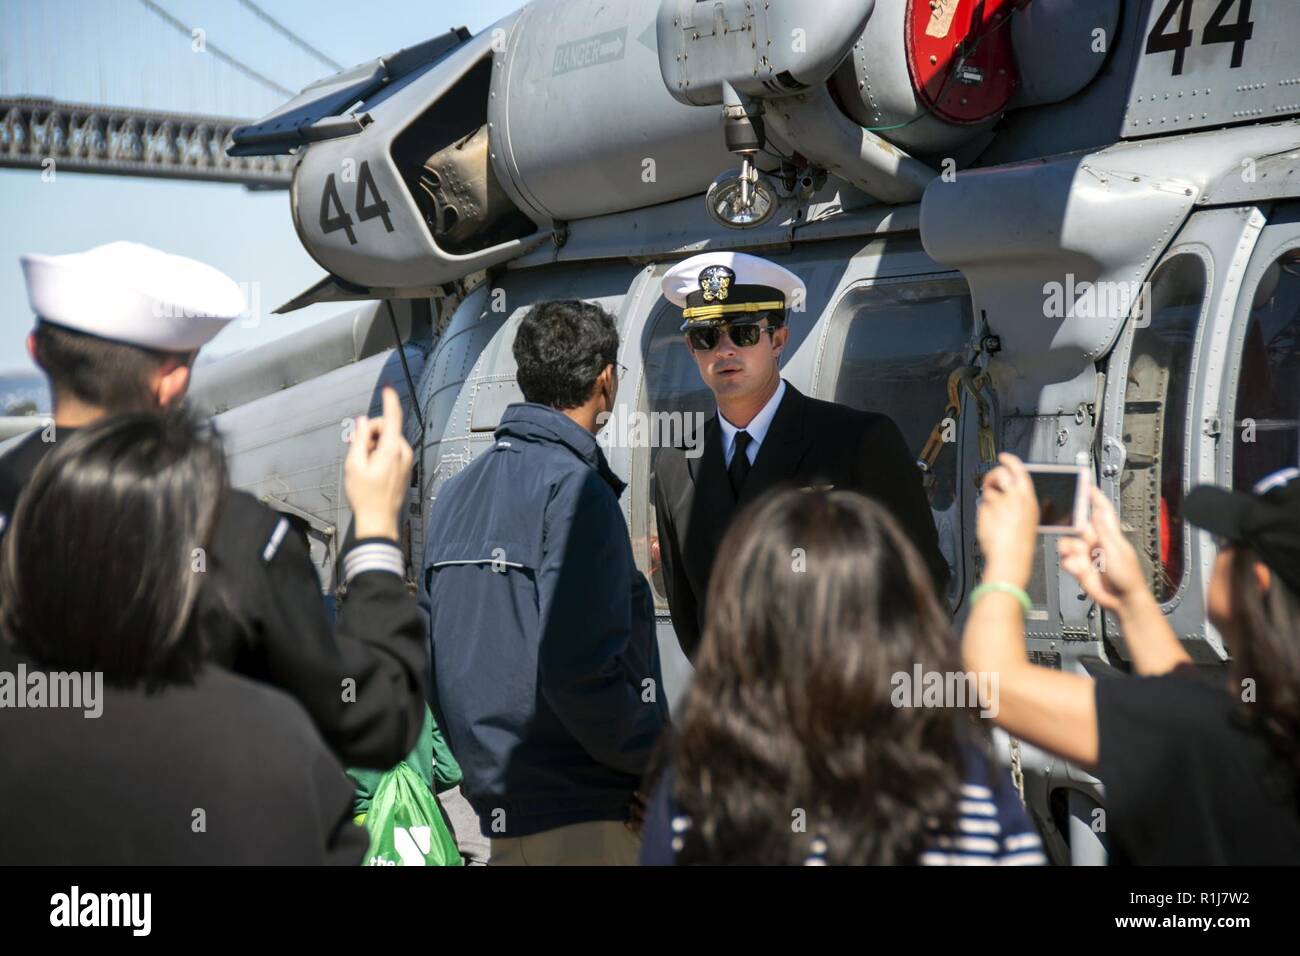 SAN FRANCISCO (Oct. 7, 2018) Lt. Scott Stamer, from San Diego, assigned to the Helicopter Sea Combat Squadron (HSC) 23, describes the capabilities of an MH-60S Sea Hawk helicopter to visitors during a general public tour of the amphibious assault ship USS Bonhomme Richard (LHD 6) during San Francisco Fleet Week 2018. San Francisco Fleet Week is an opportunity for the American public to meet their Navy, Marine Corps, and Coast Guard teams and experience America’s sea services. During Fleet Week, service members participate in various community service events, showcase capabilities and equipment Stock Photo